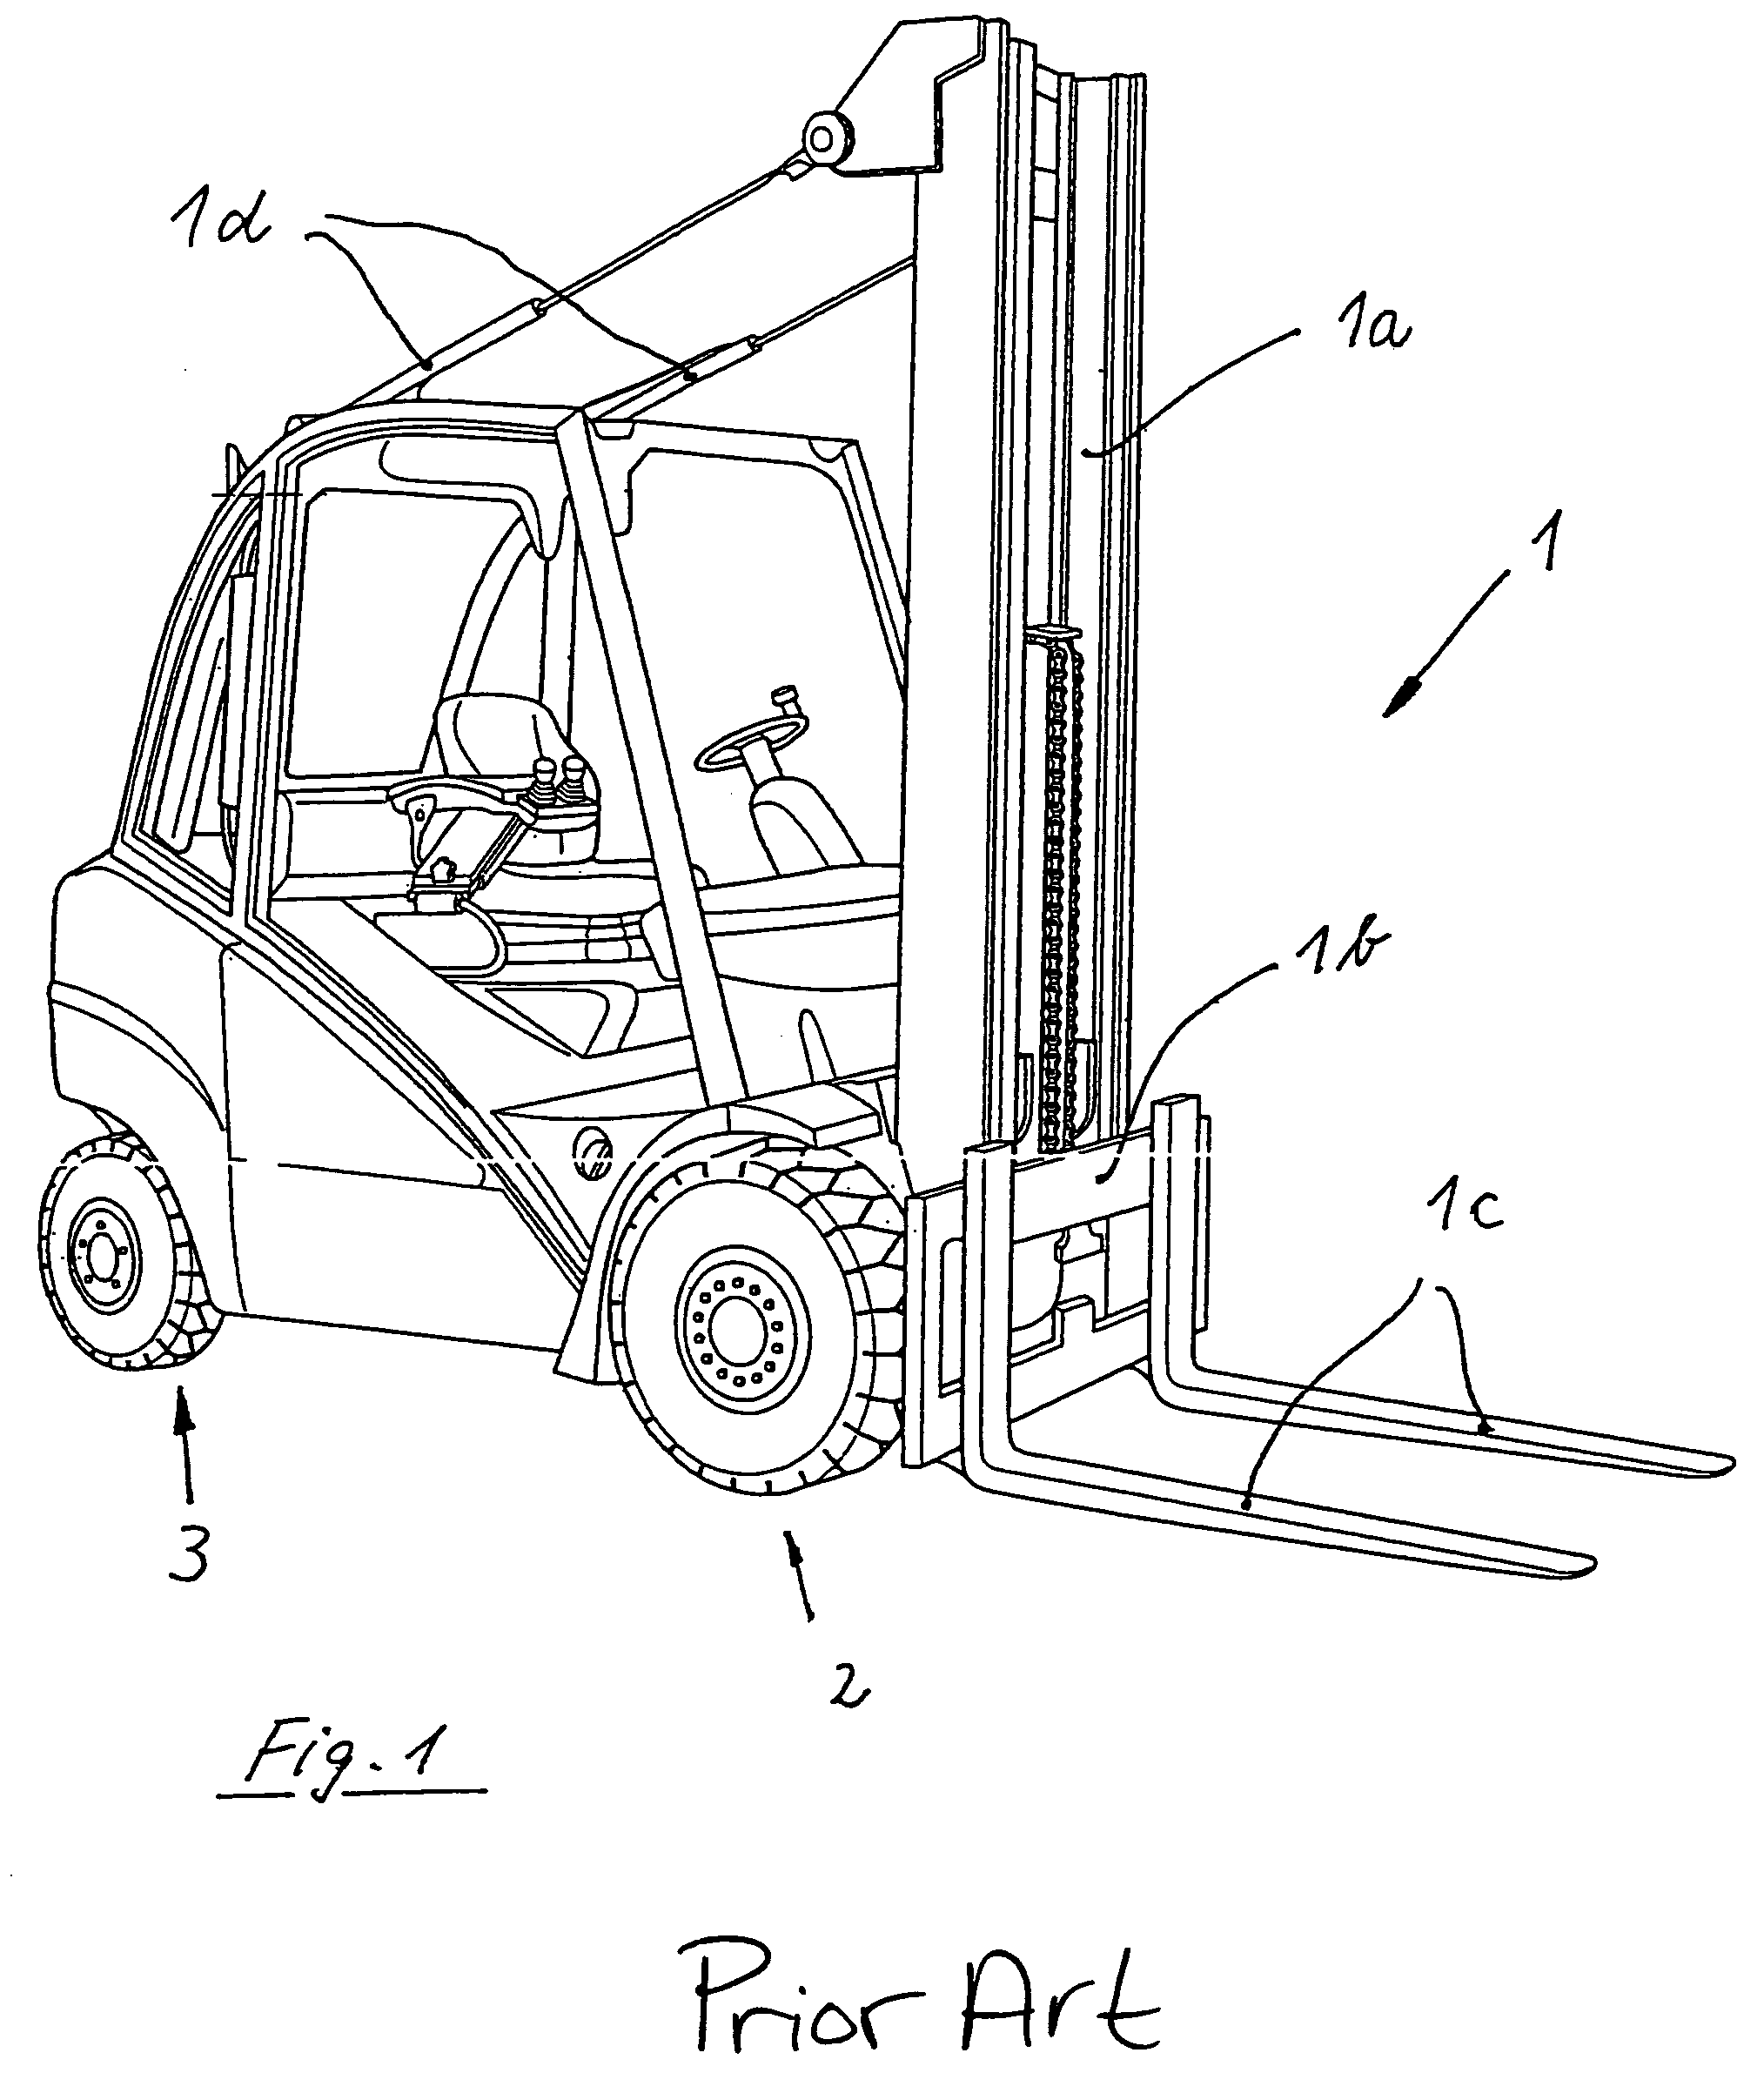 Industrial truck having increased static or quasi-static tipping stability